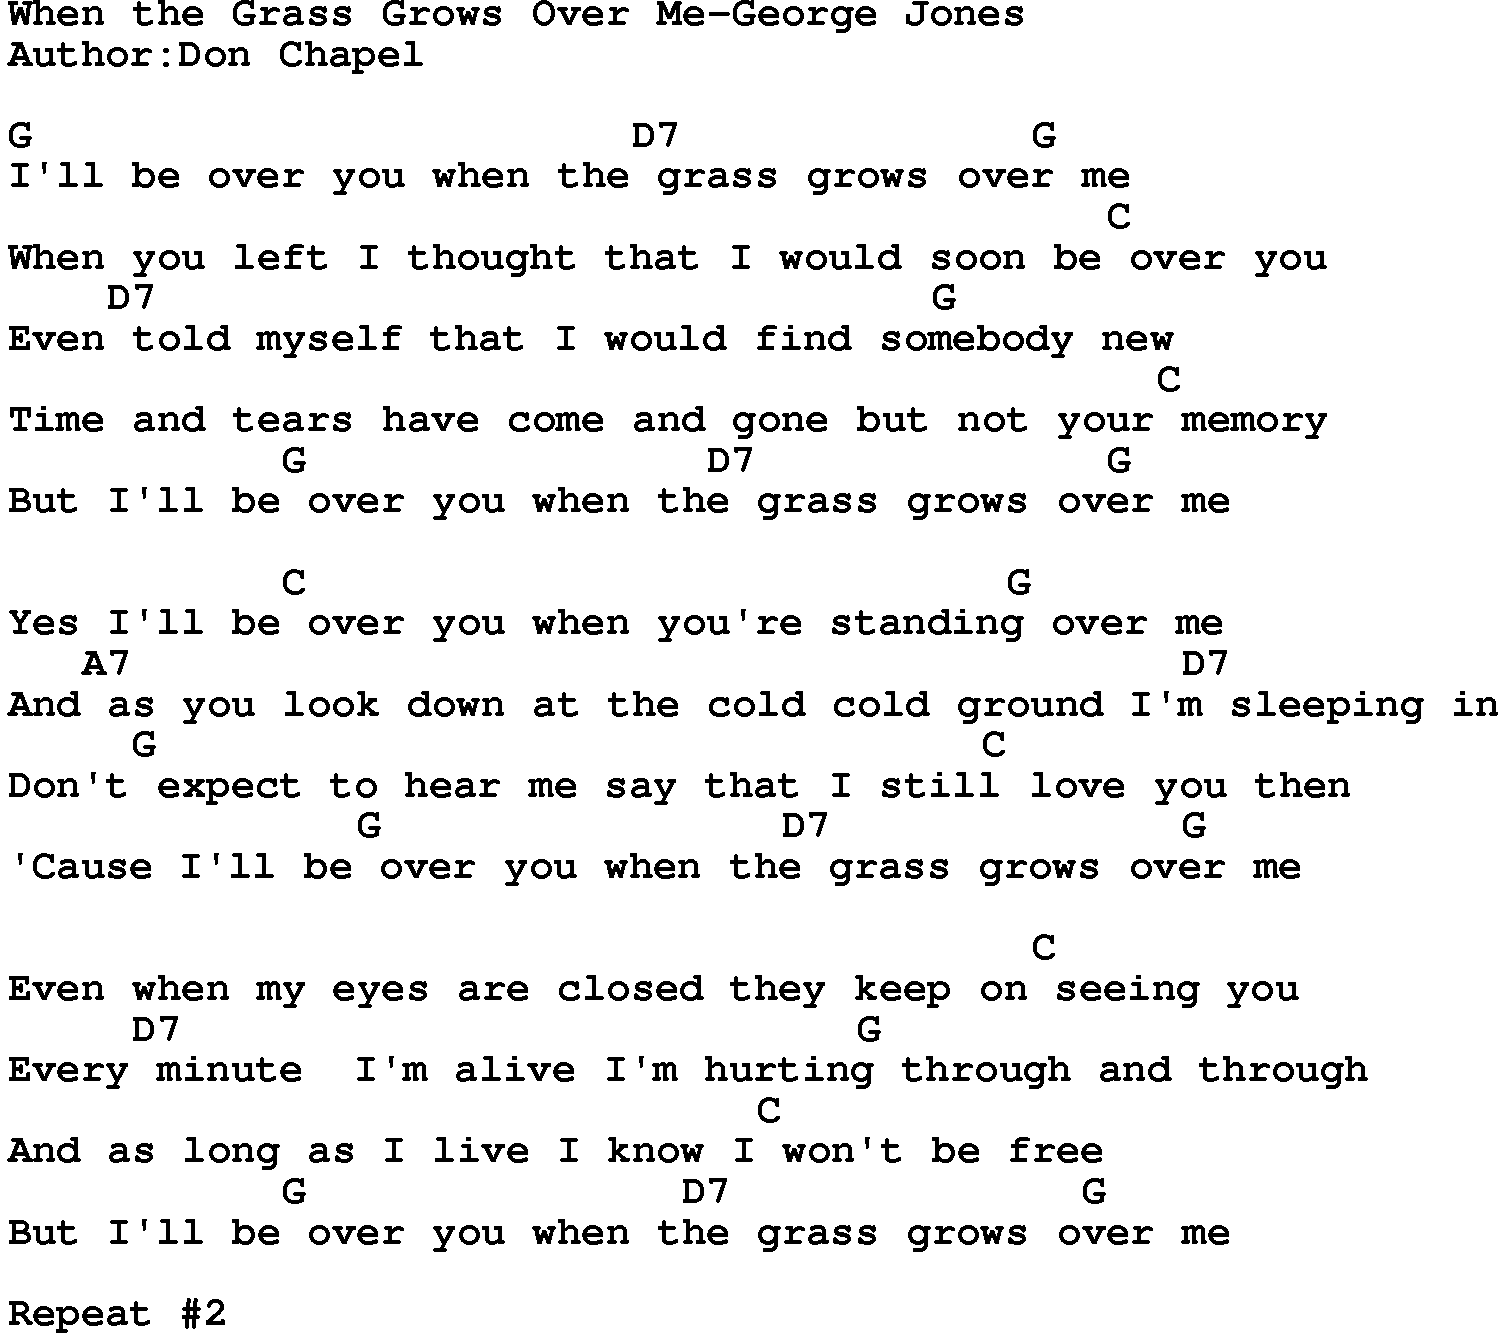 Country music song: When The Grass Grows Over Me-George Jones lyrics and chords